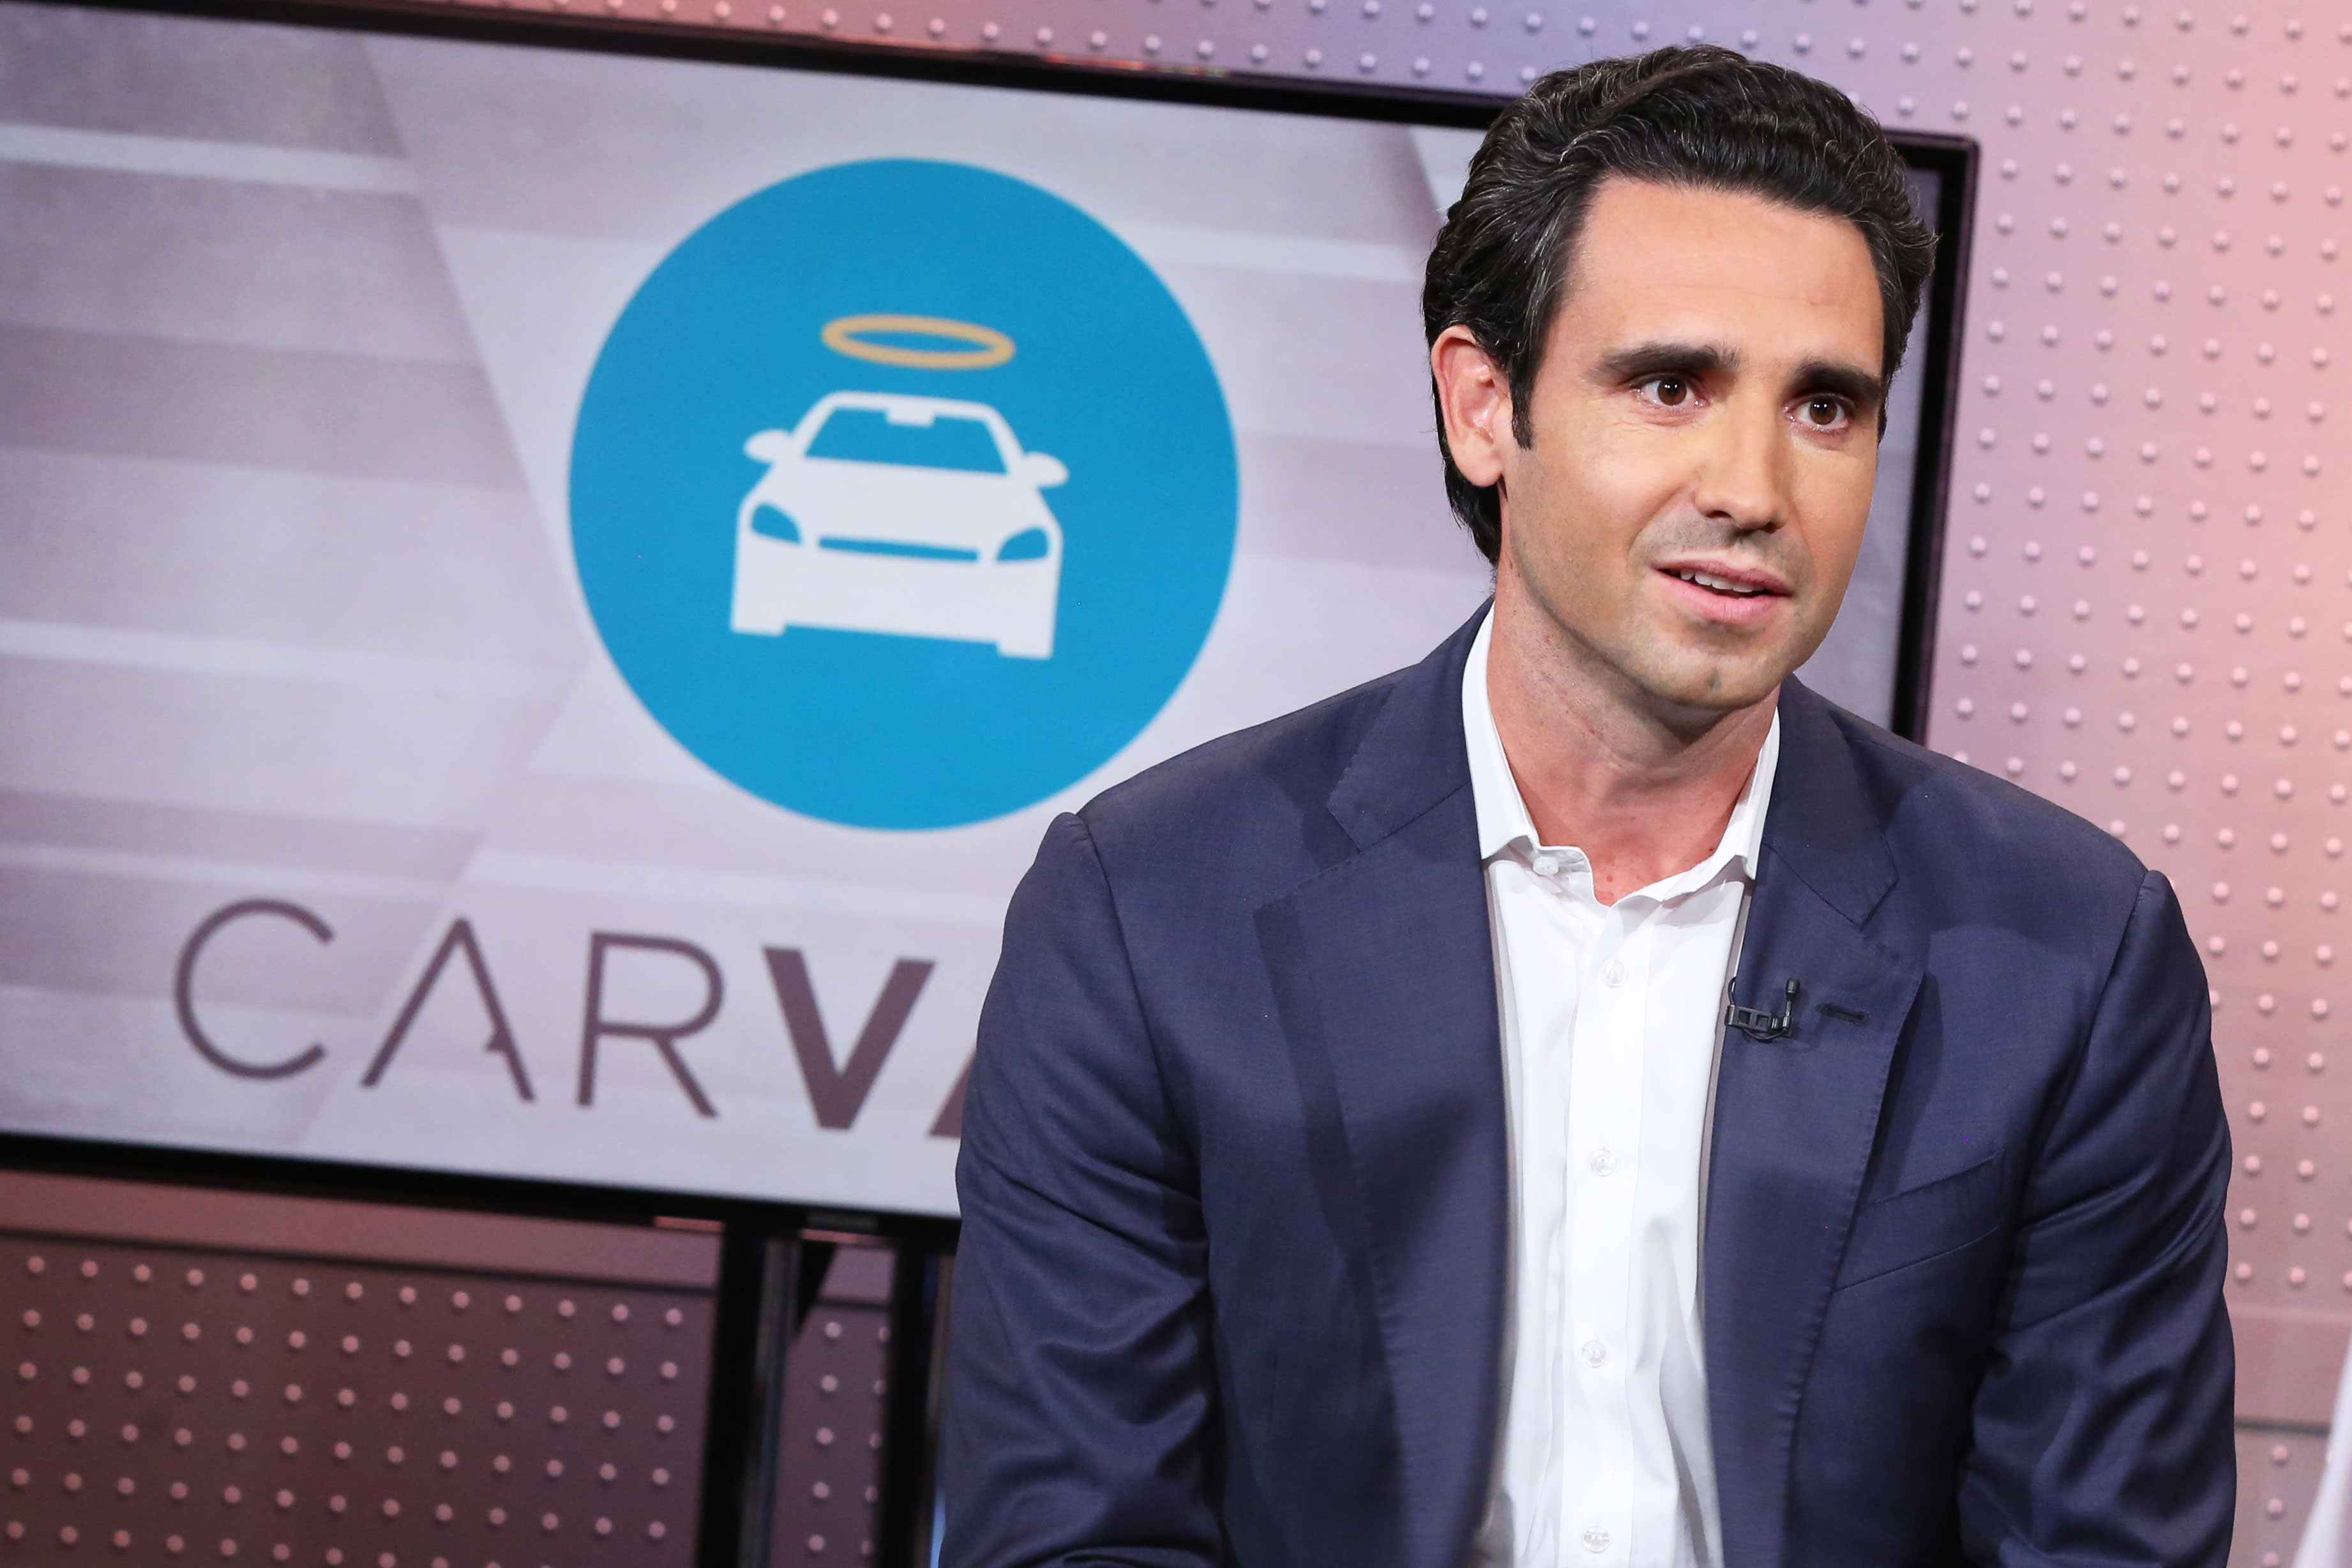 Cowen downgrades Carvana, cites 'lengthened' path to profitability in a difficult macro environment